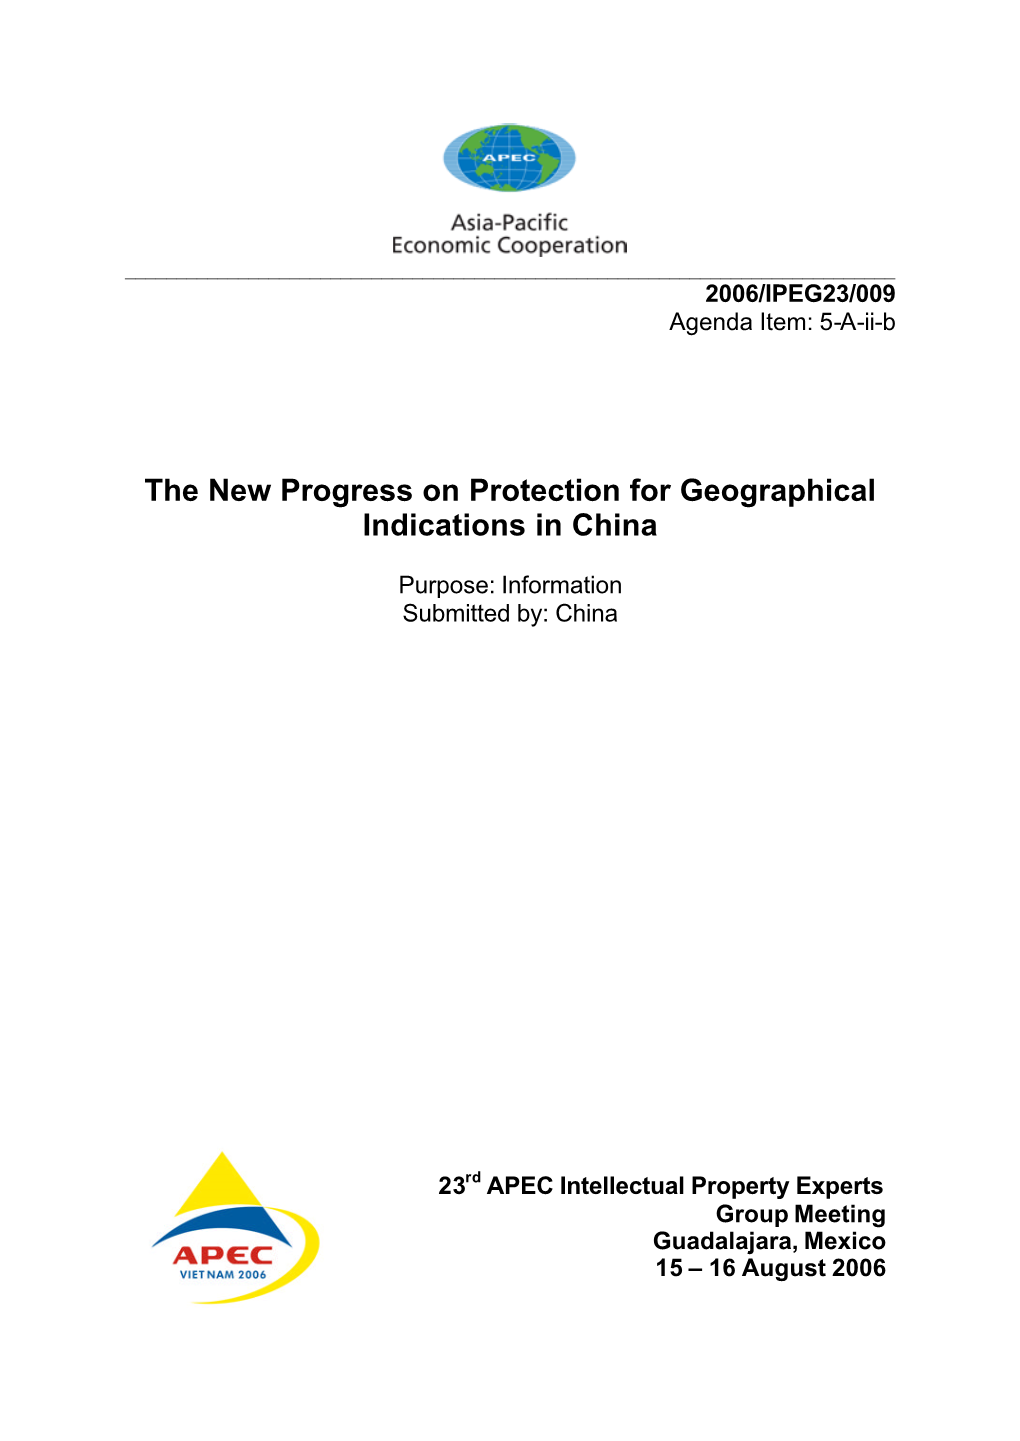 The New Progress on Protection for Geographical Indications in China